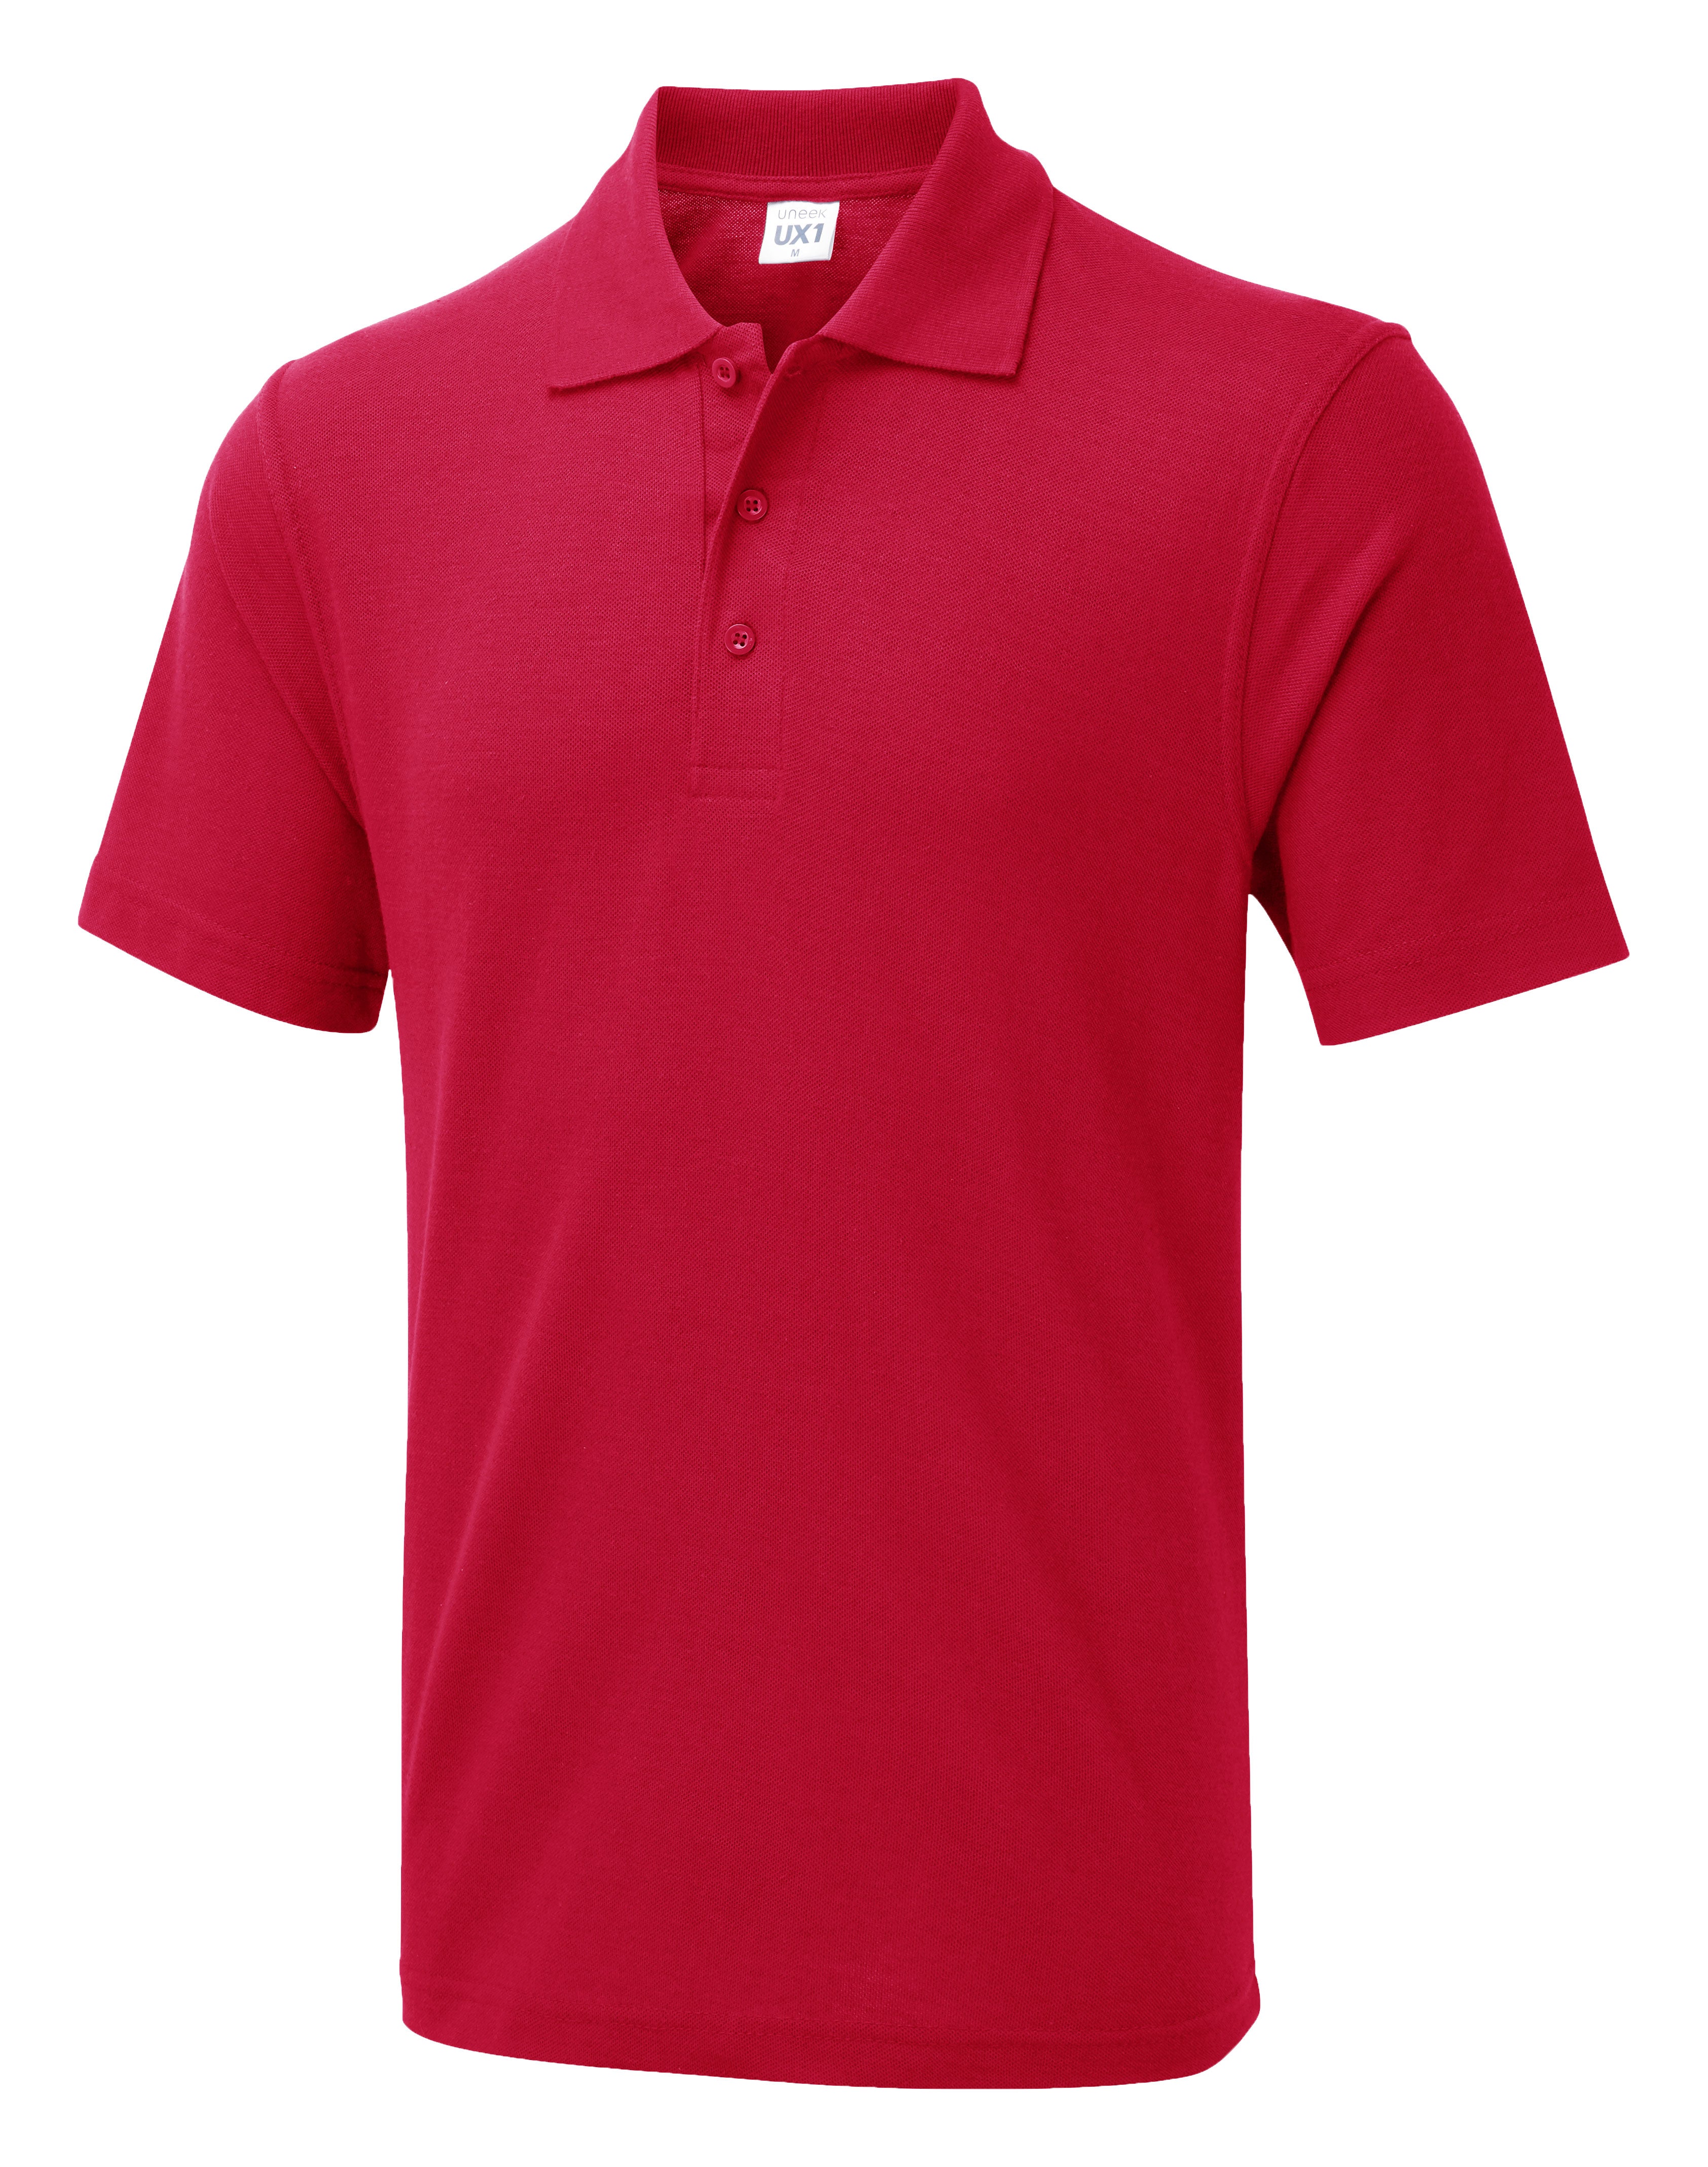 Uneek The UX Polo - ux1 (Red)